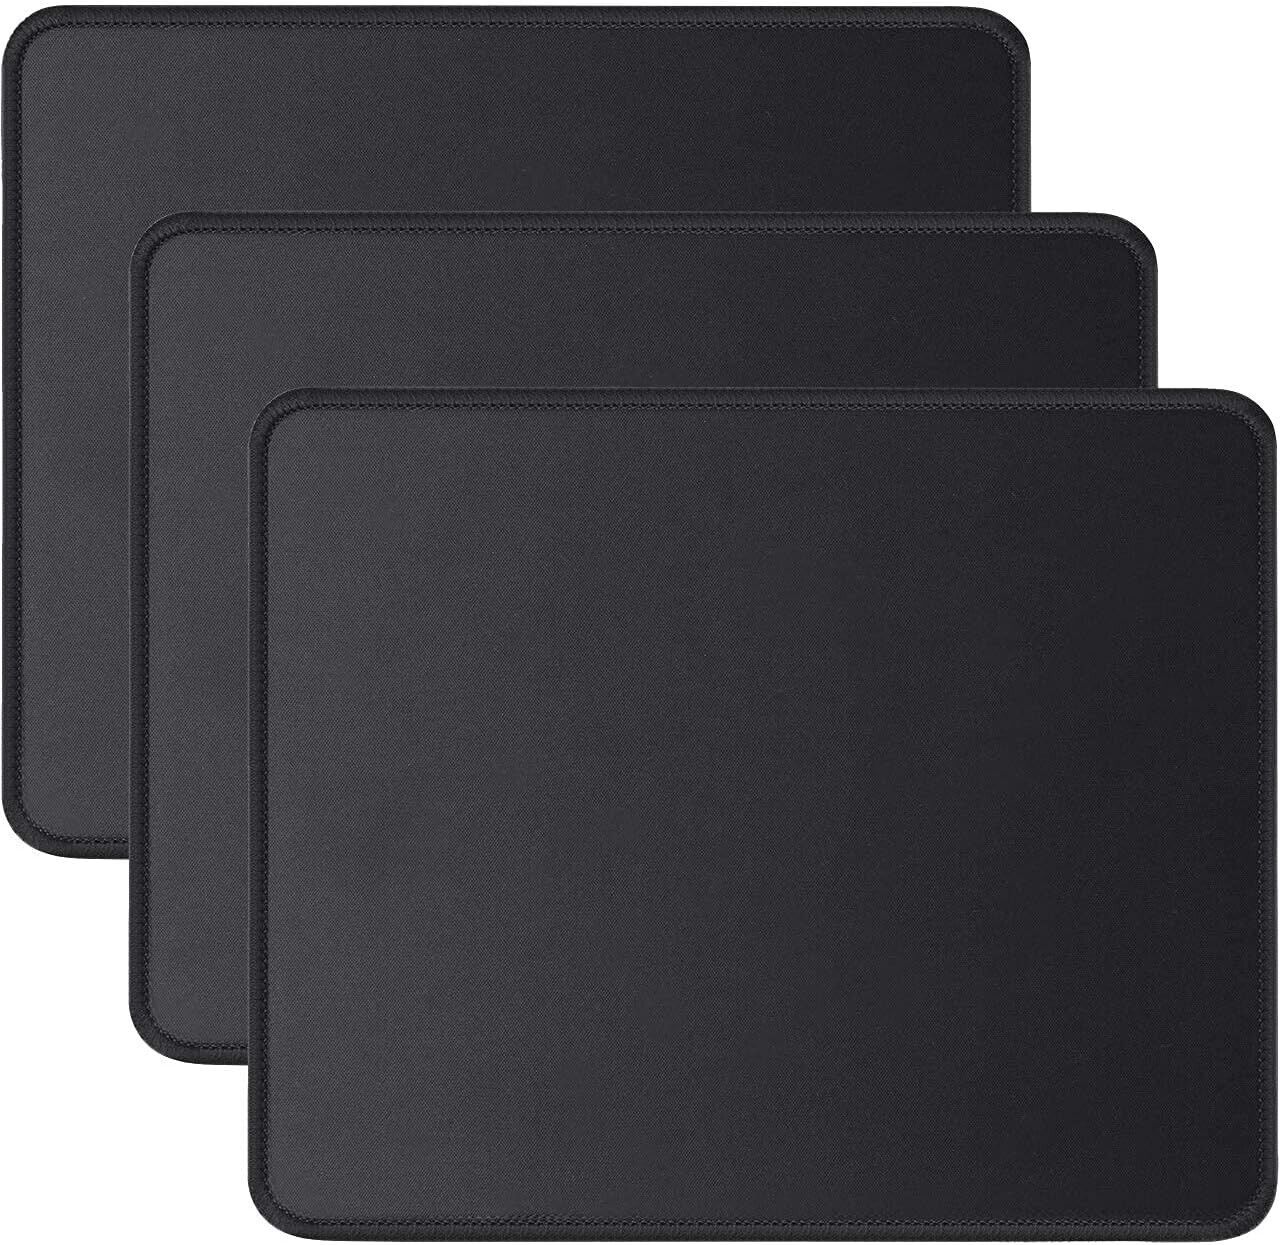 3X Non-Slip Mouse Pad Stitched Edge PC Laptop For Computer PC Gaming Rubber Base